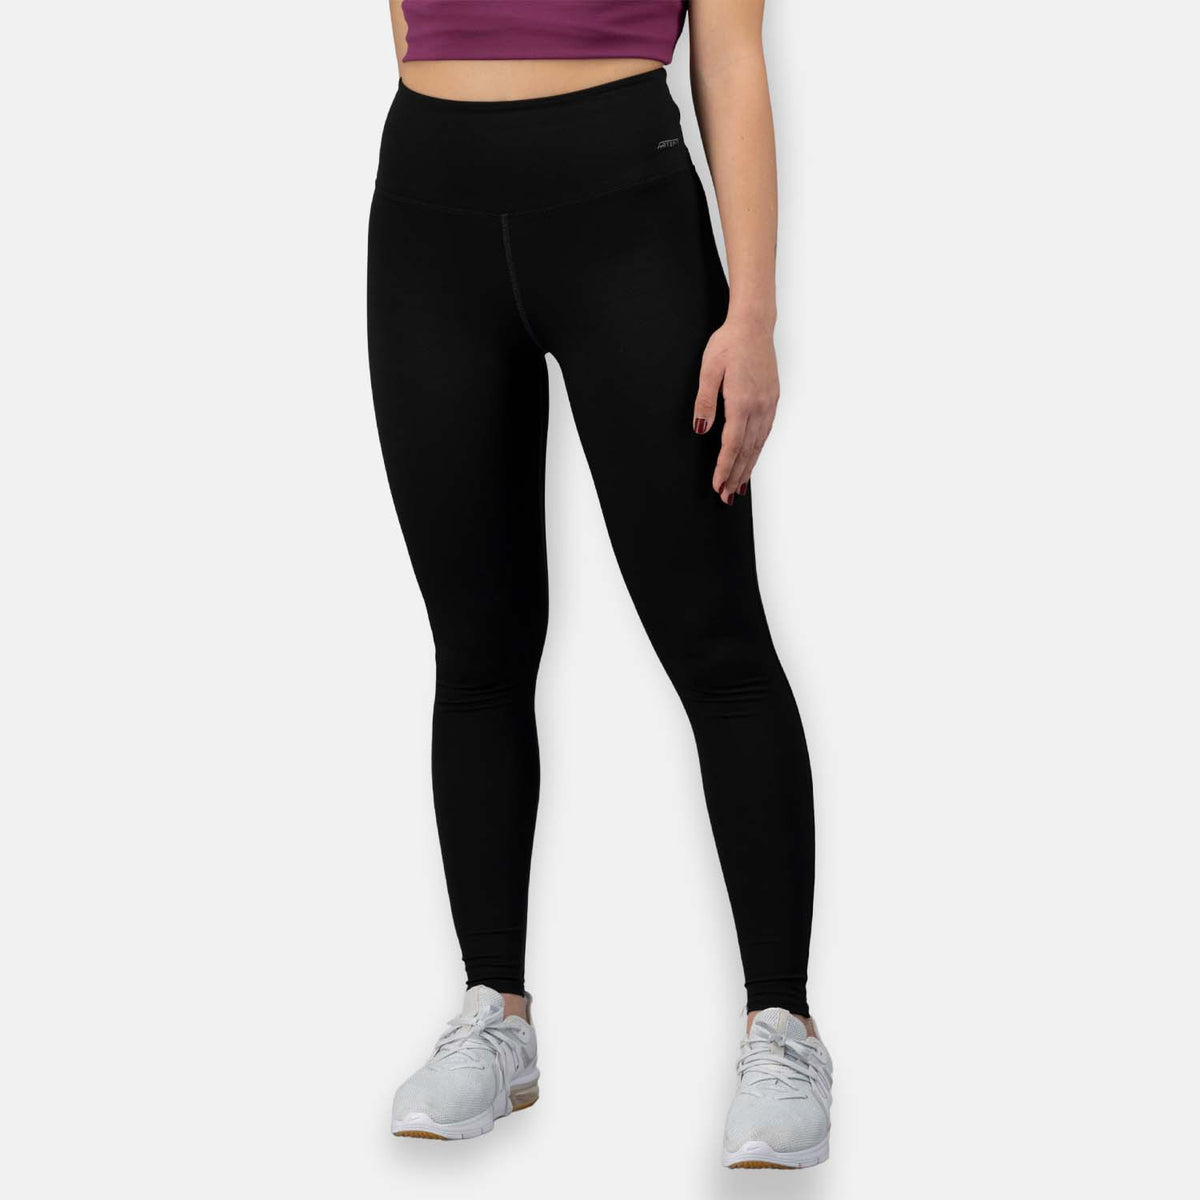 Buy AbsoluteFit Curved Panel Workout Tights for Women Online